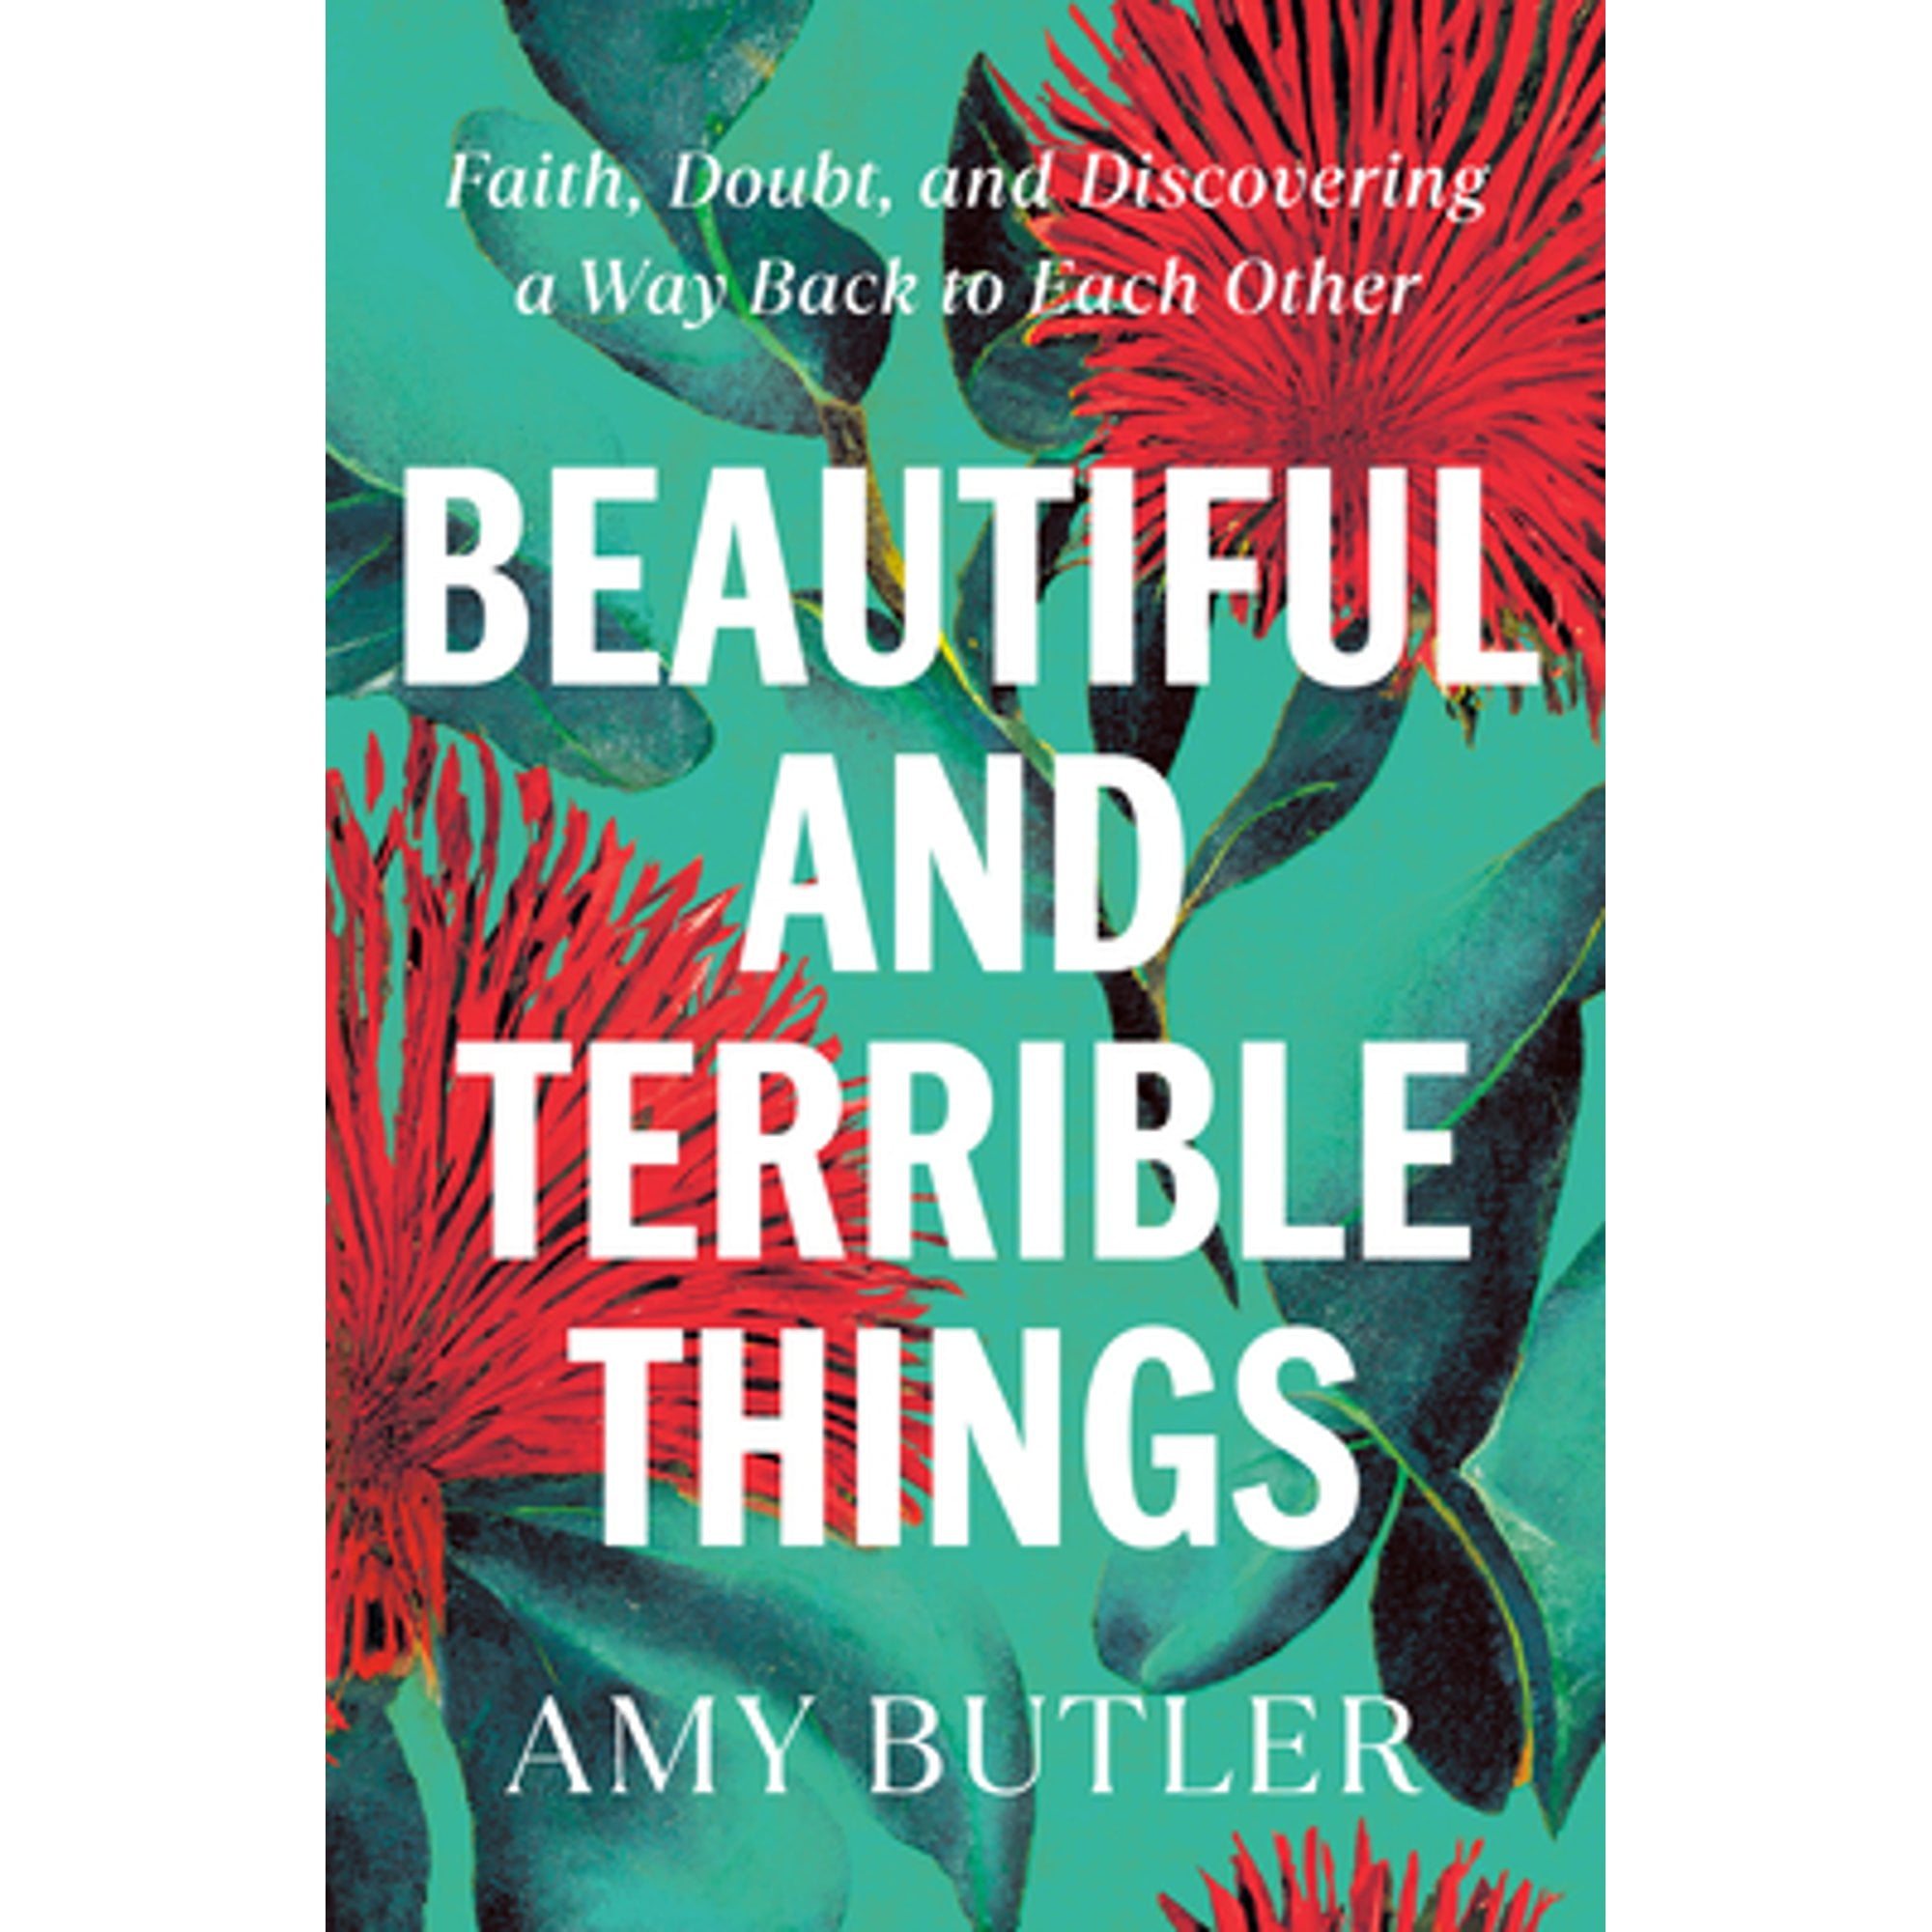 Pre-Owned Beautiful and Terrible Things: Faith, Doubt, and Discovering a Way Back to Each Other (Hardcover) by Amy Butler